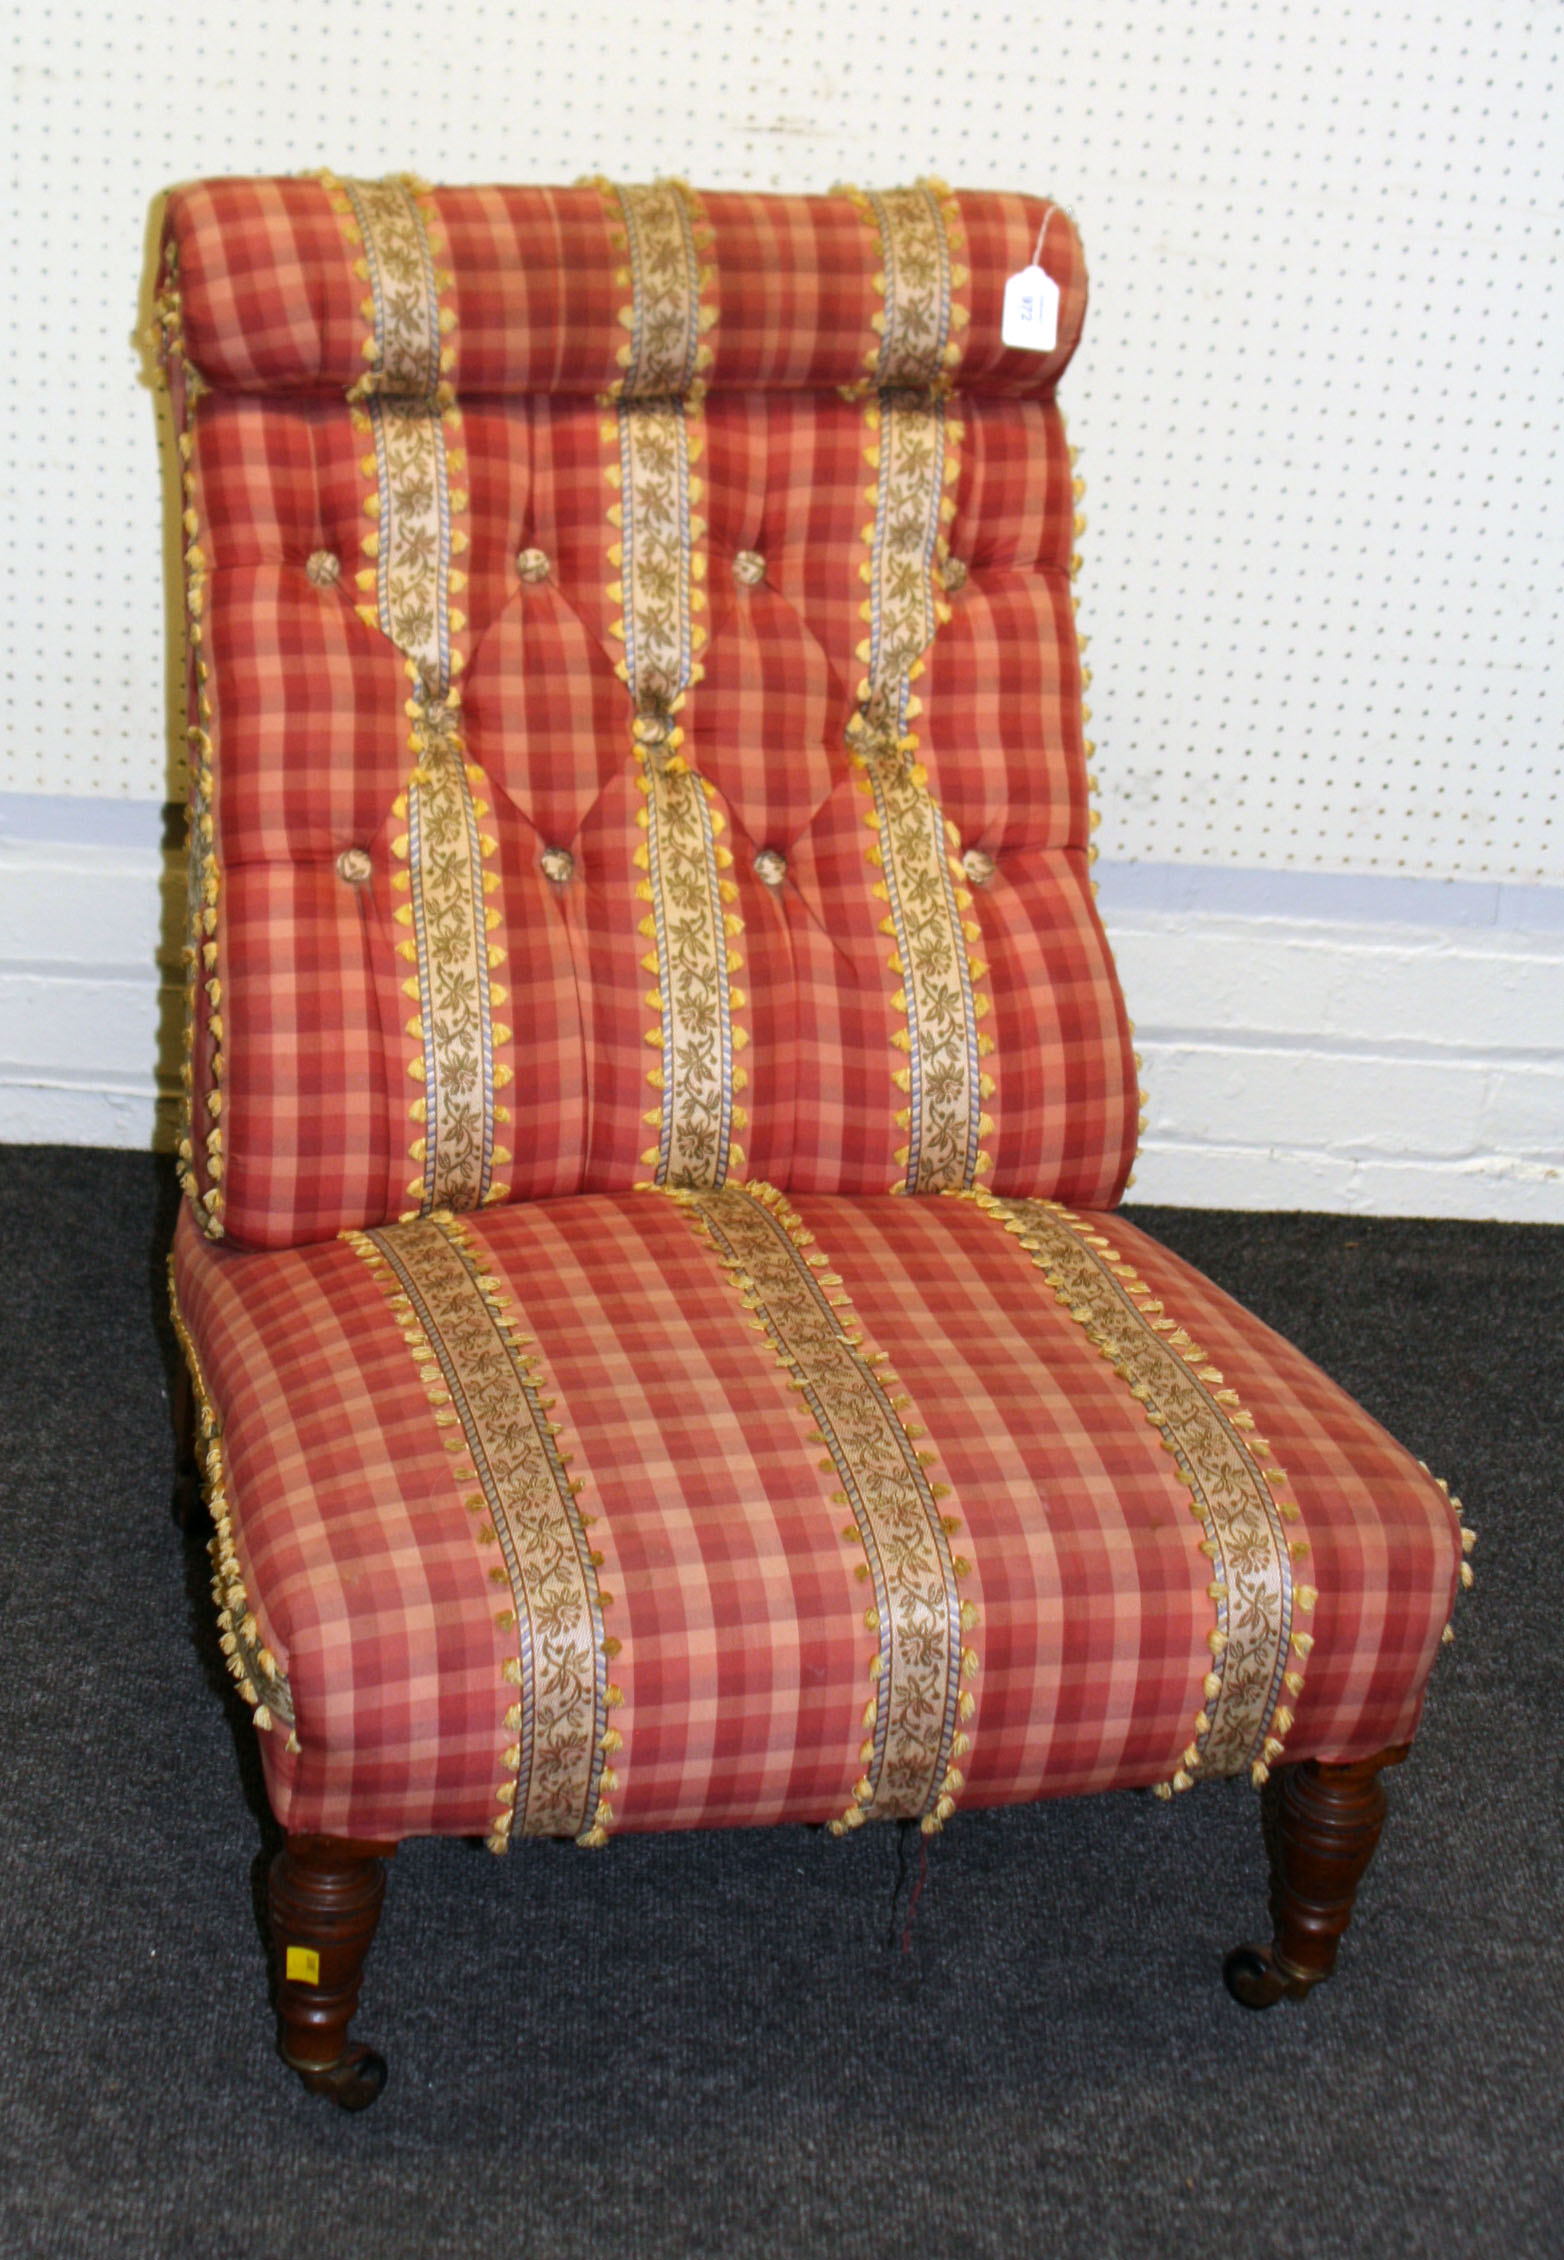 An Edwardian walnut framed nursing chair, later upholstered in applied stripe and tasselled